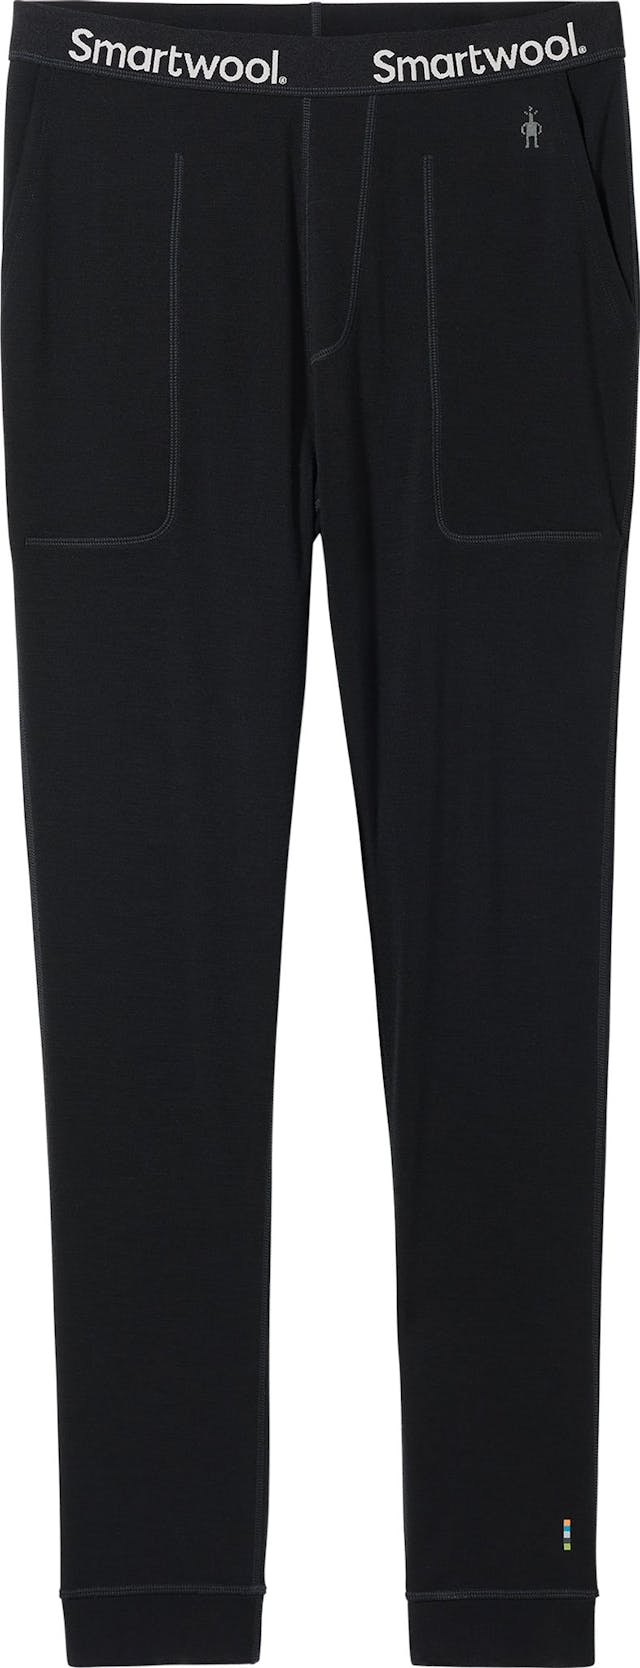 Product image for Thermal Merino Jogger - Unisex